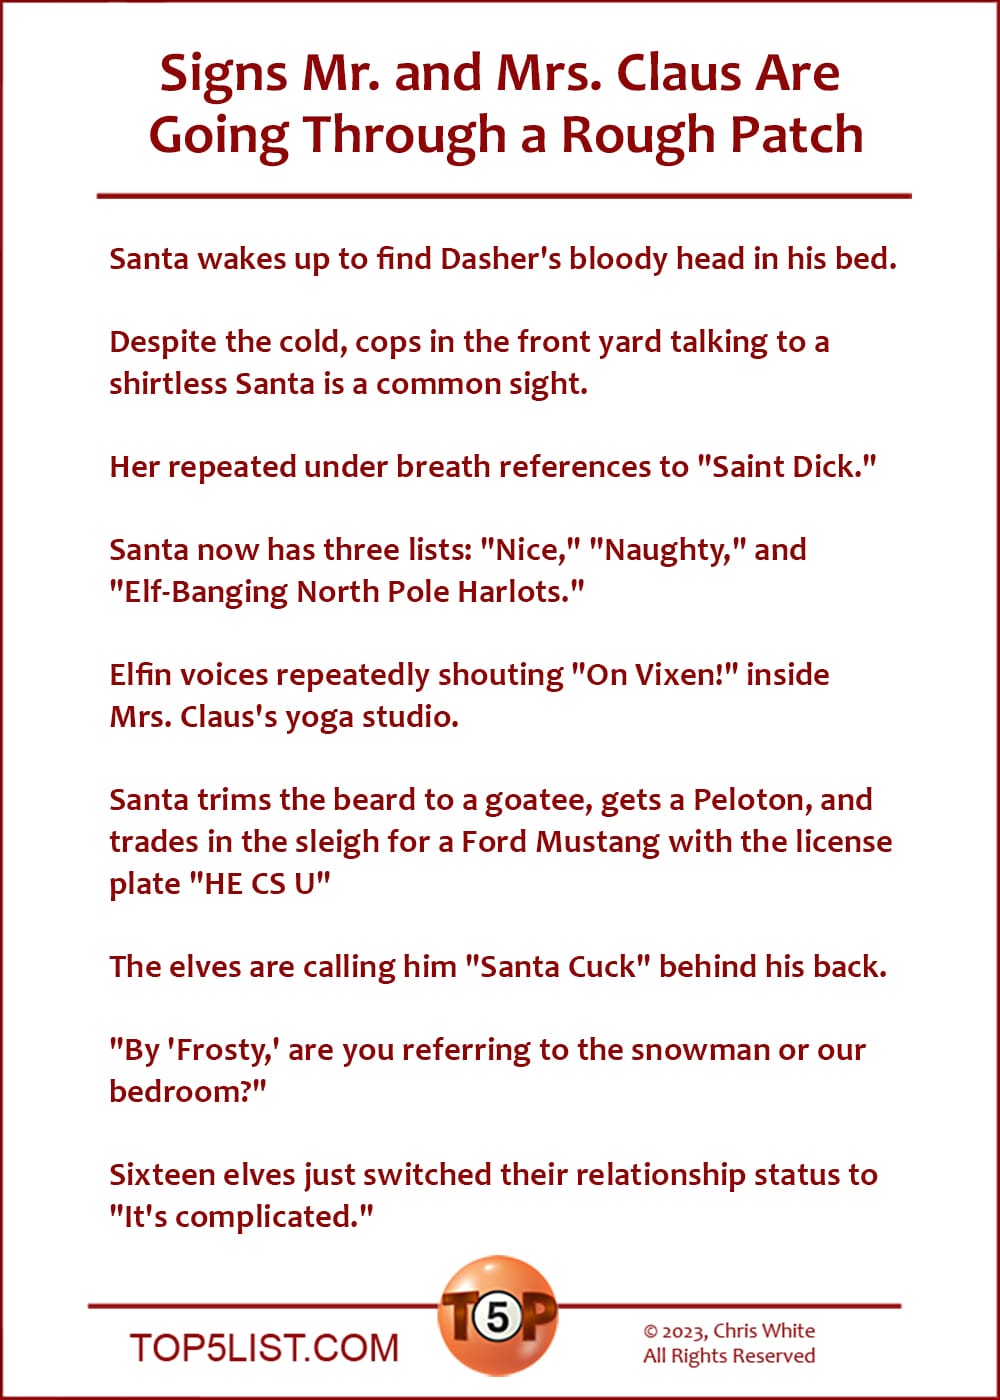 Signs Mr. and Mrs. Claus Are Going Through a Rough Patch  | Santa wakes up to find Dasher's bloody head at the foot of his bed.  Despite the cold, cops in the front yard talking to a shirtless Santa is a common sight.  Her repeated under breath references to "Saint Dick."  Santa now has three lists: "Nice," "Naughty," and "Elf-Banging North Pole Harlots."  Elfin voices repeatedly shouting "On Vixen!" inside Mrs. Claus's yoga studio.  Santa trims the beard to a goatee, gets a Peloton, and trades in the sleigh for a Ford Mustang with the license plate "HE CS U"  The elves are calling him "Santa Cuck" behind his back.  "By 'Frosty,' are you referring to the snowman or our bedroom?"  Sixteen elves just switched their relationship status to "It's complicated."